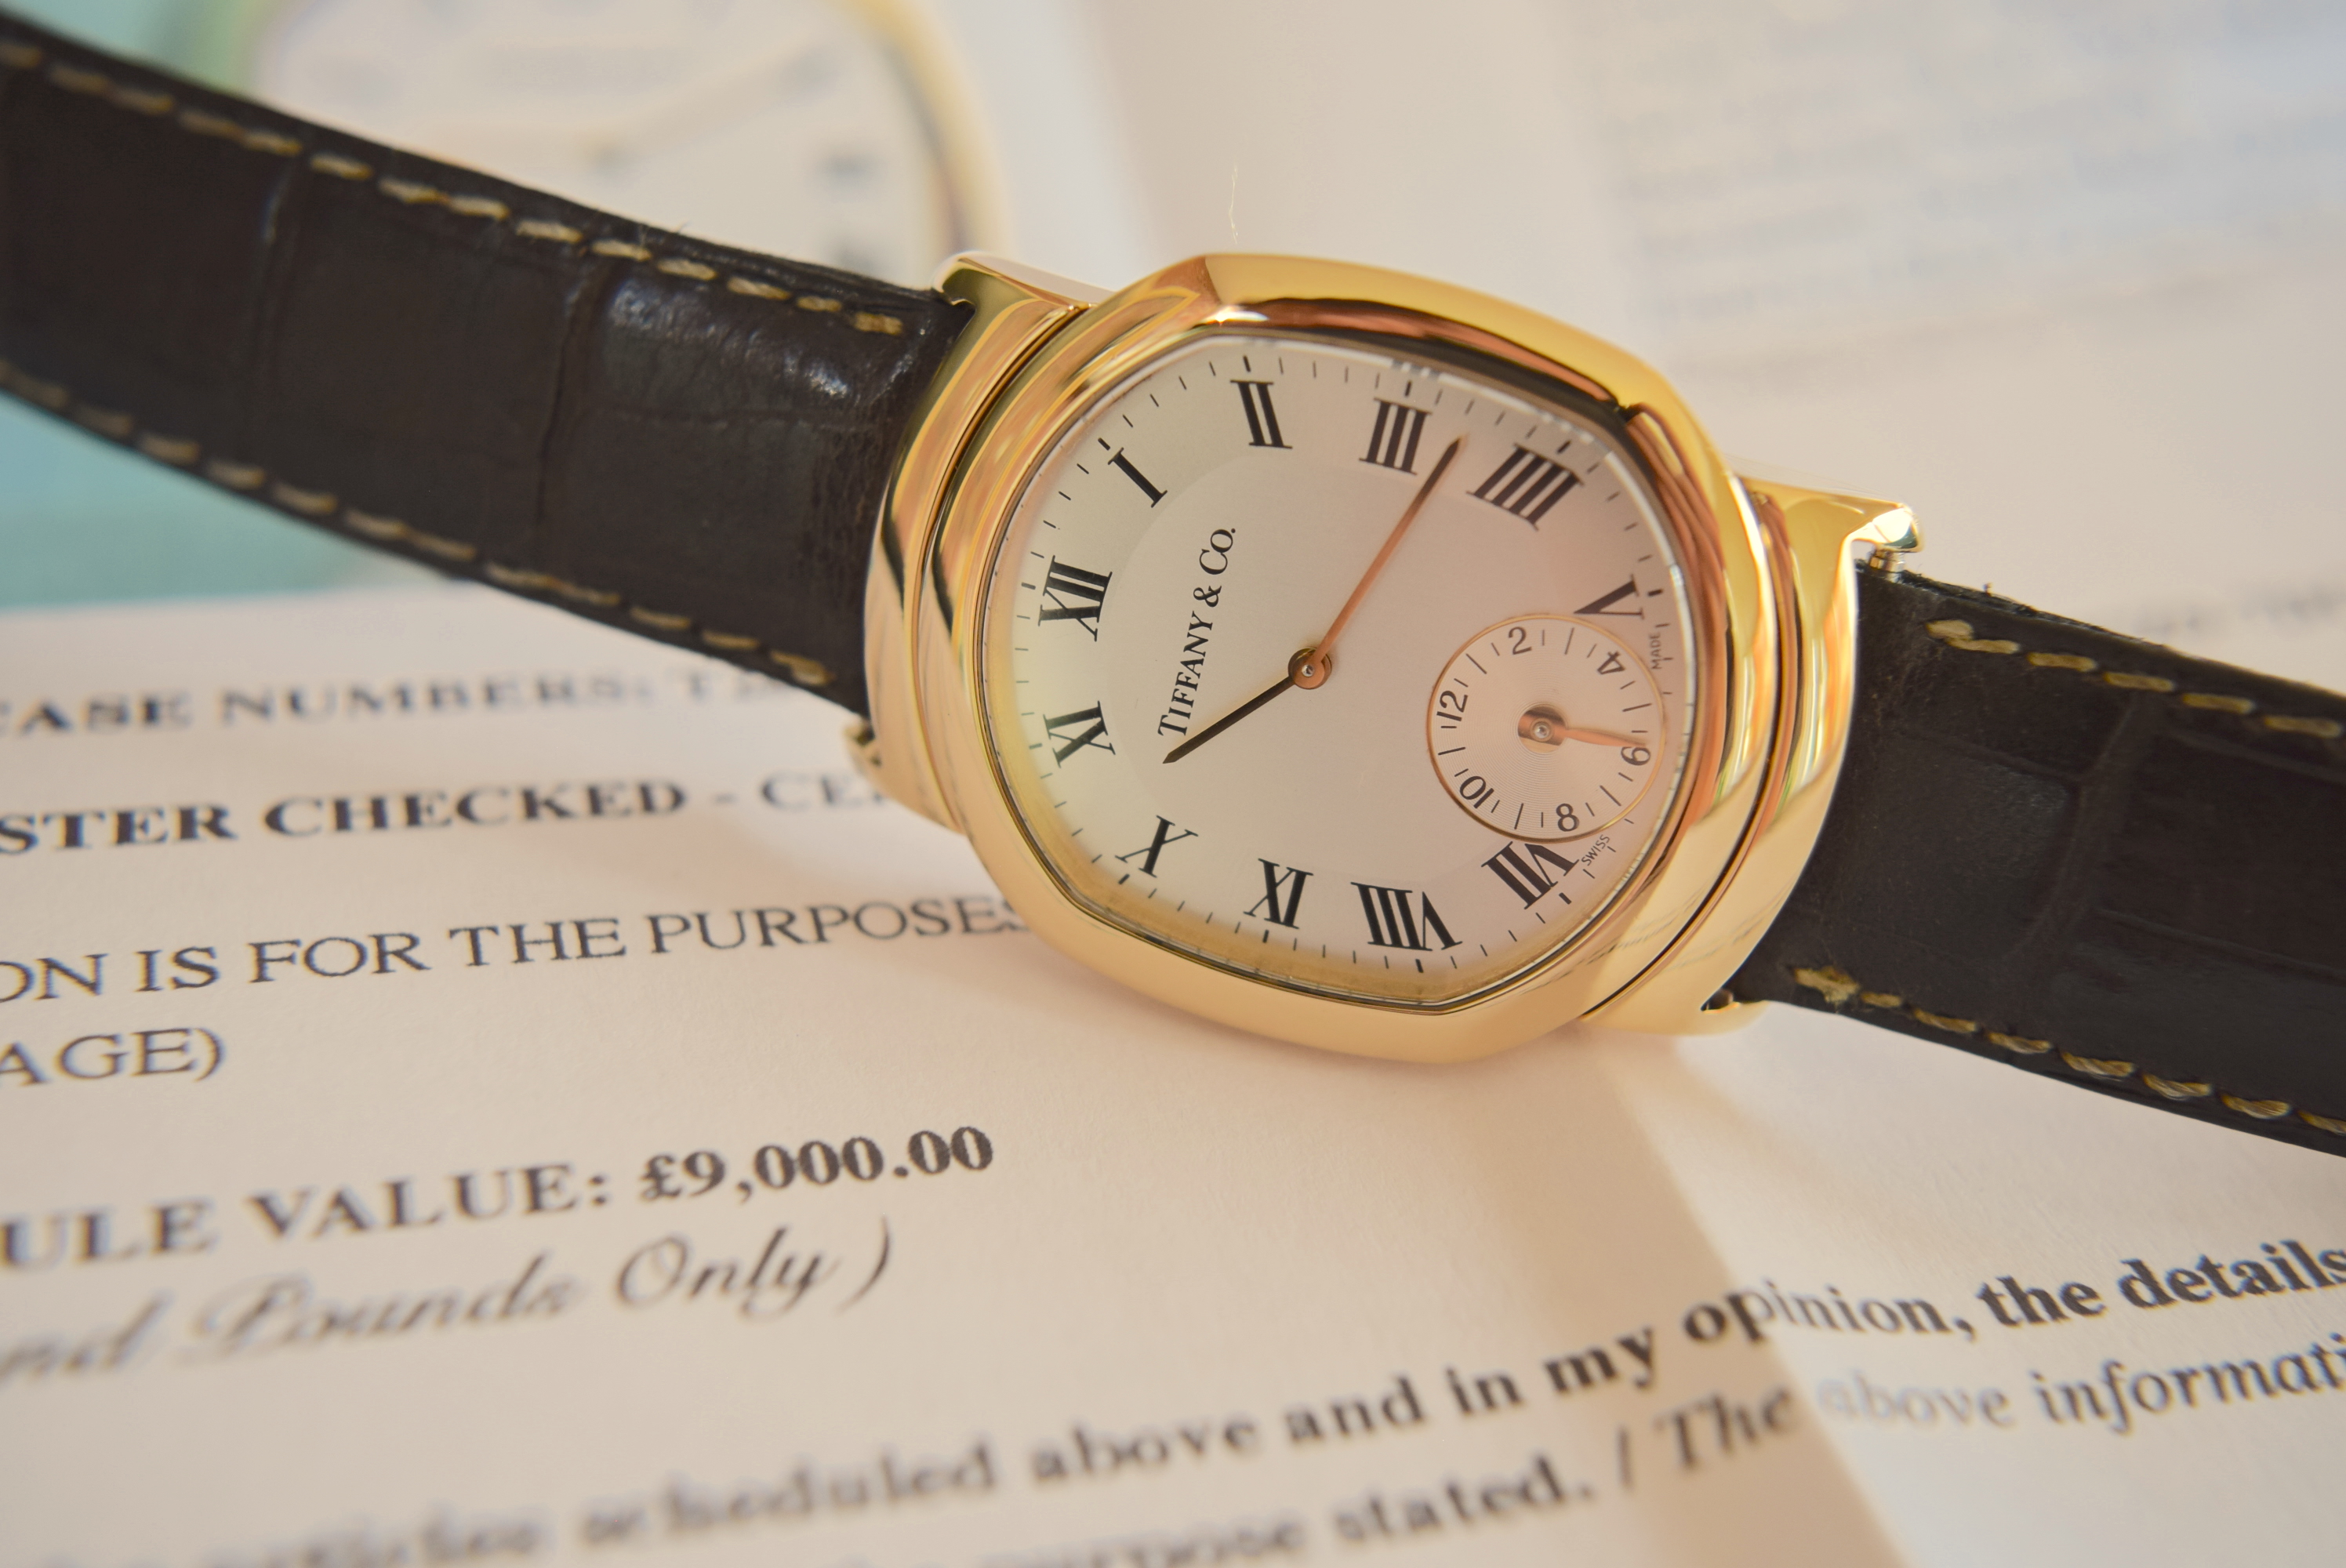 RARE 18K GOLD TIFFANY & CO. "TONNEAU" DUAL-TIME GENTS WRISTWATCH (WITH £9,000 VALUATION) - Image 2 of 10